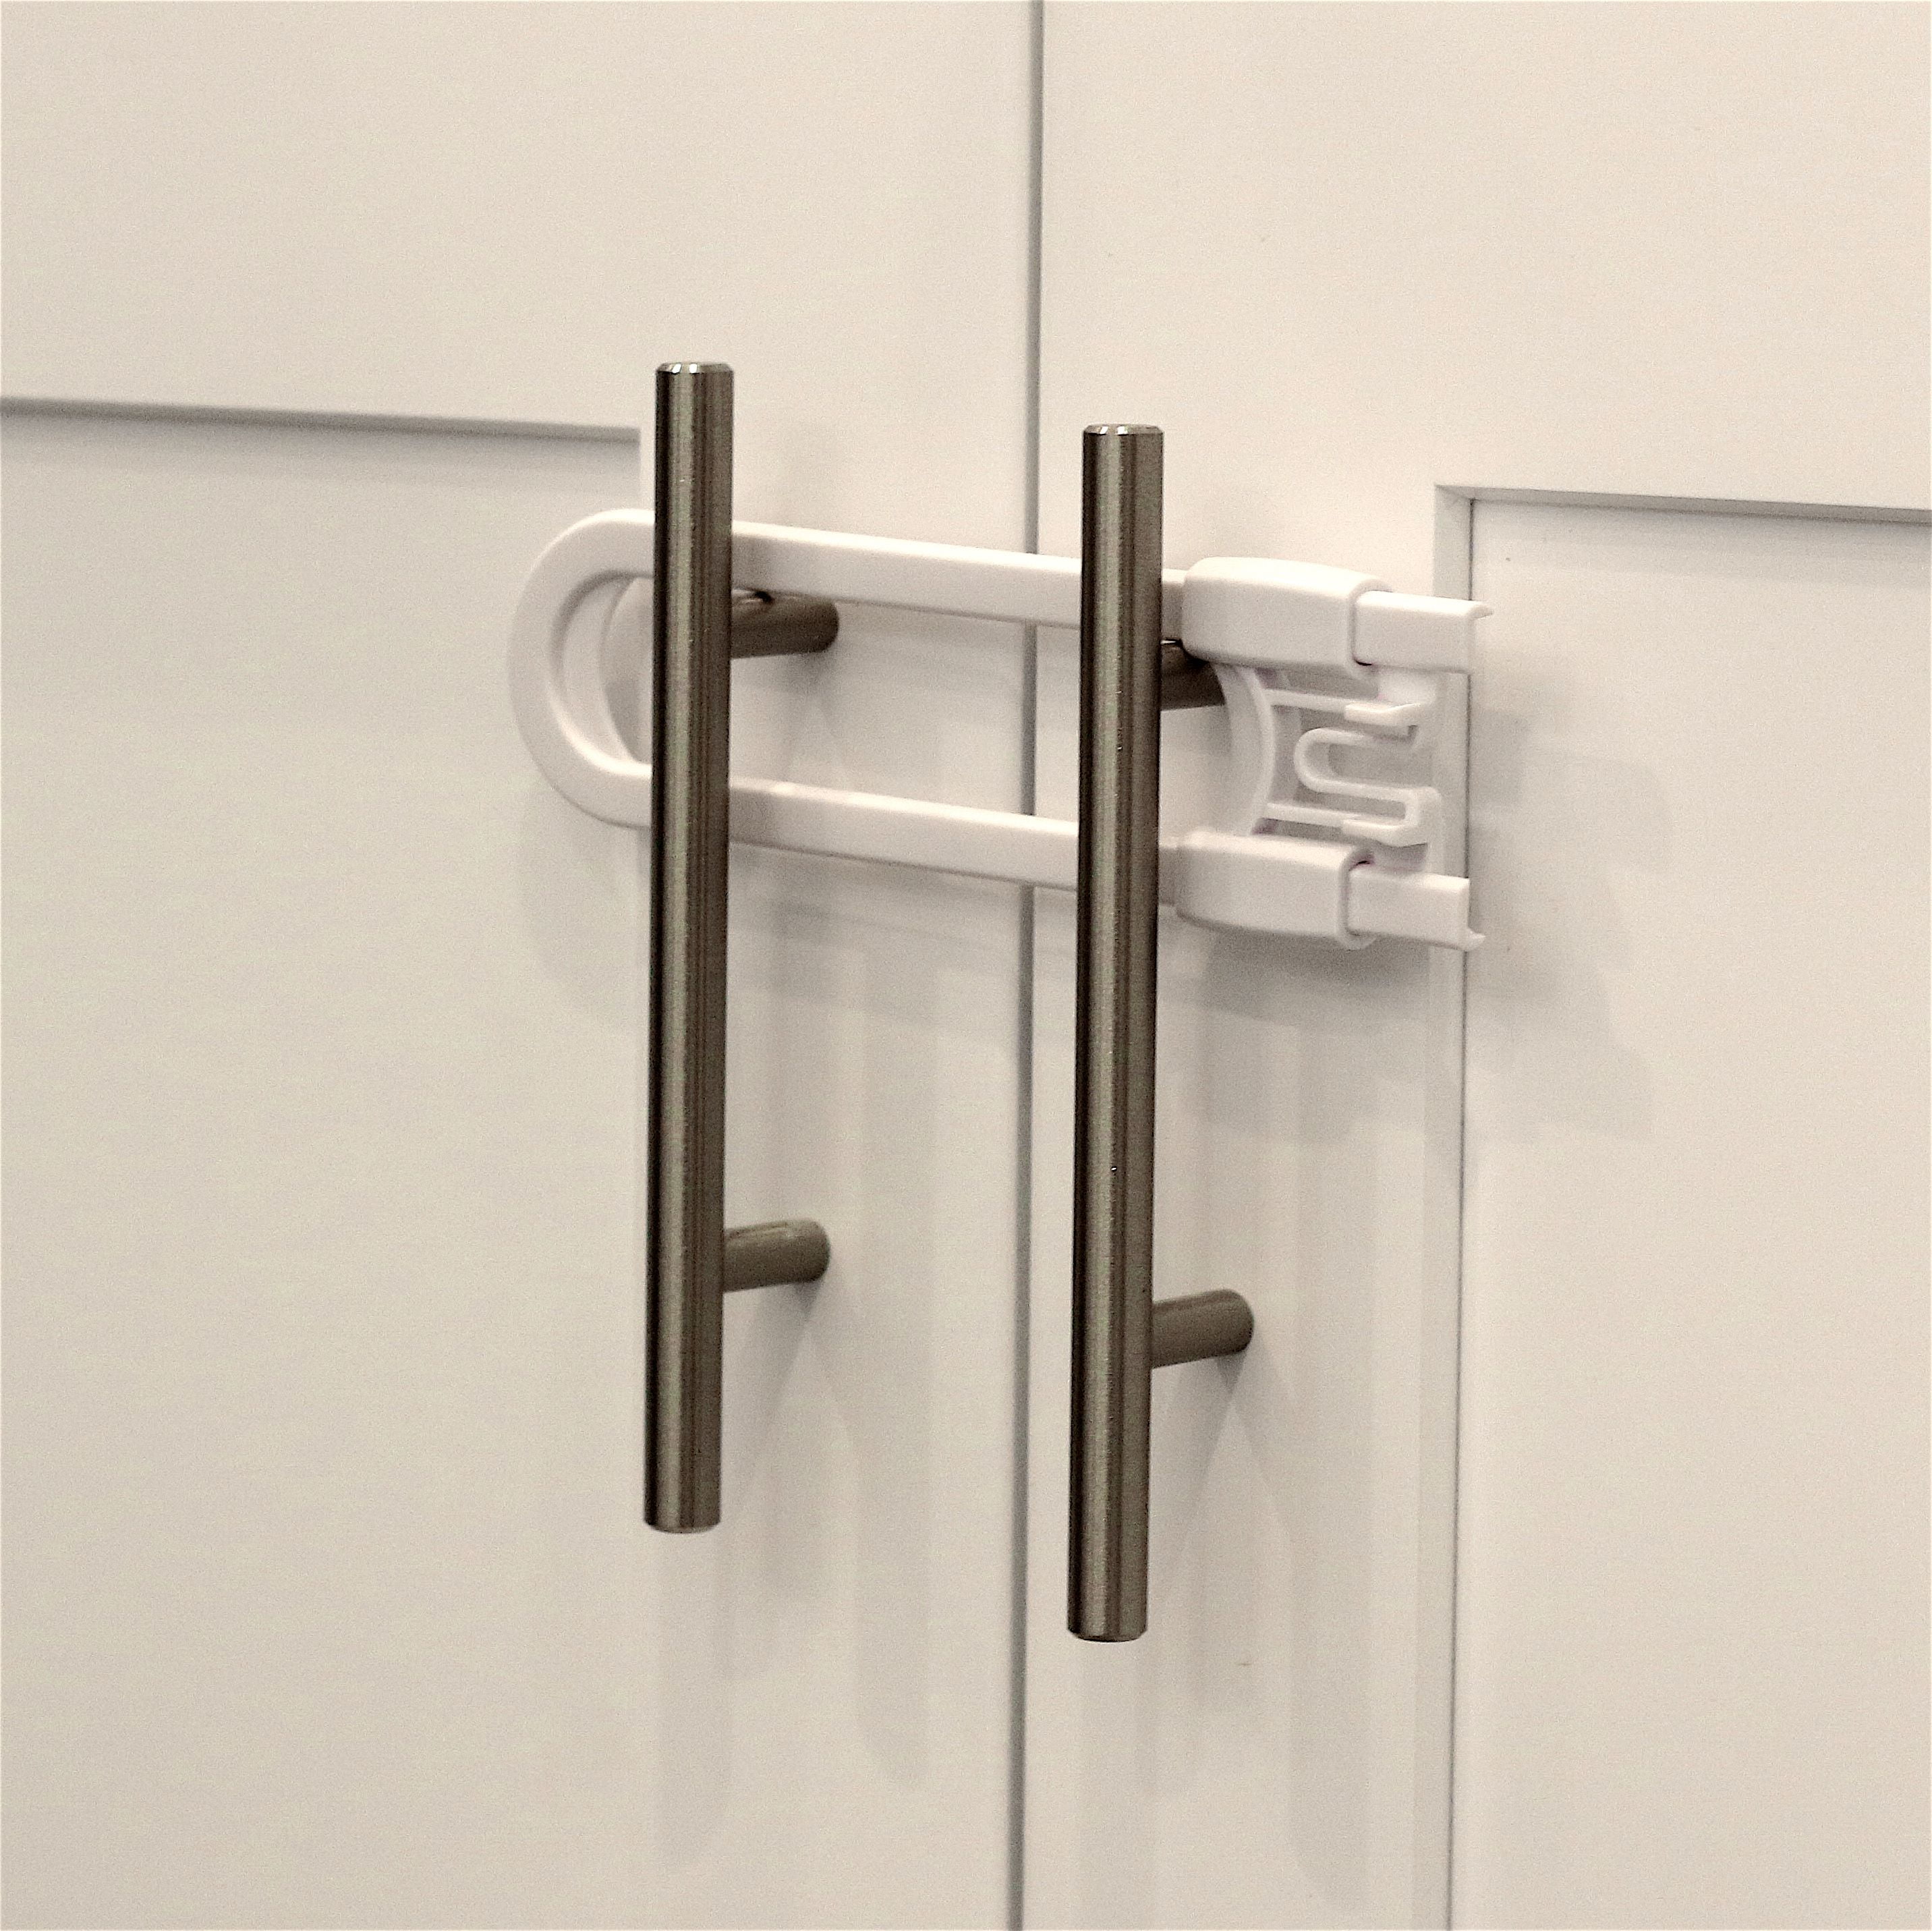 Baby Safe Refrigerator Lock with Key Code Lock Baby Safety Cabinet